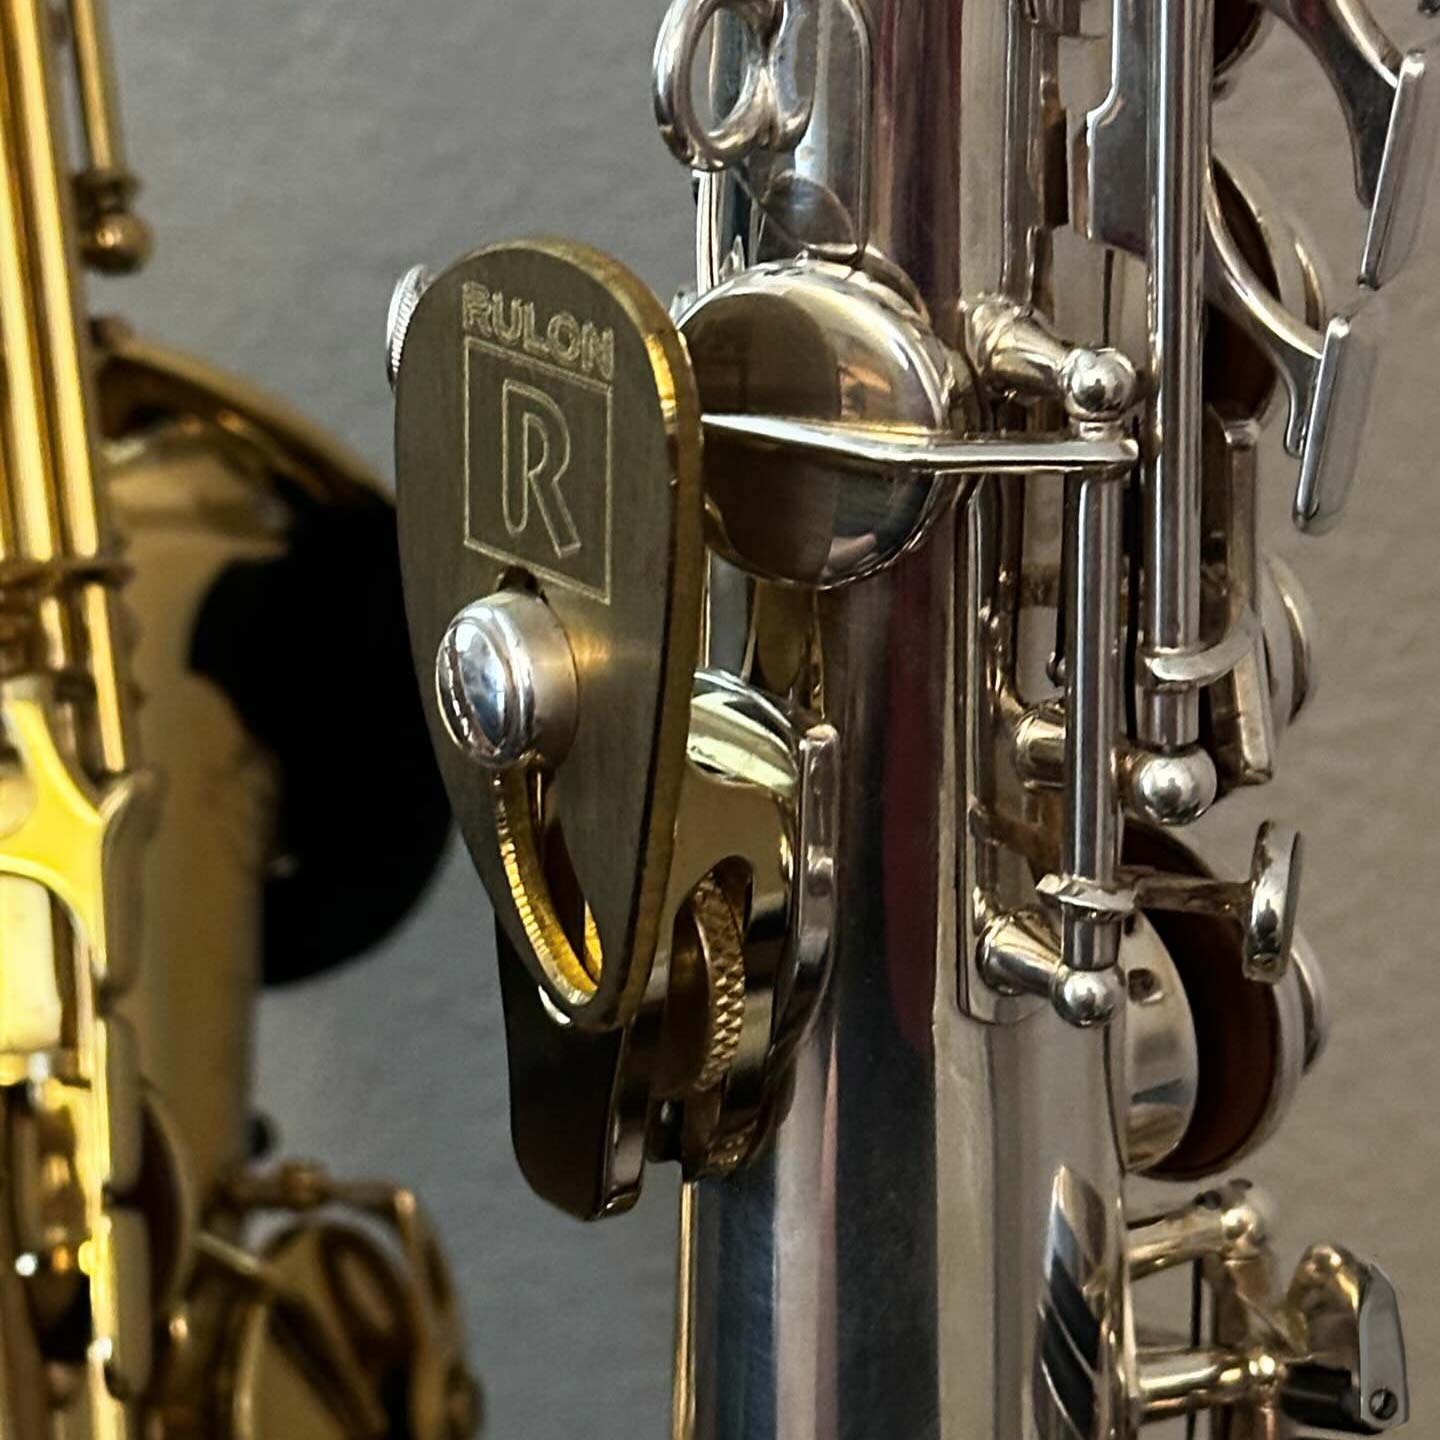 A silver plated soprano saxophone using a RULON saxophone rest mounted to a LAGAN wrist saver. These devices help adjust grip position and thumb placement on the saxophone so the player feels less tension in the wrist and no pain or discomfort from the saxophone thumb hook.